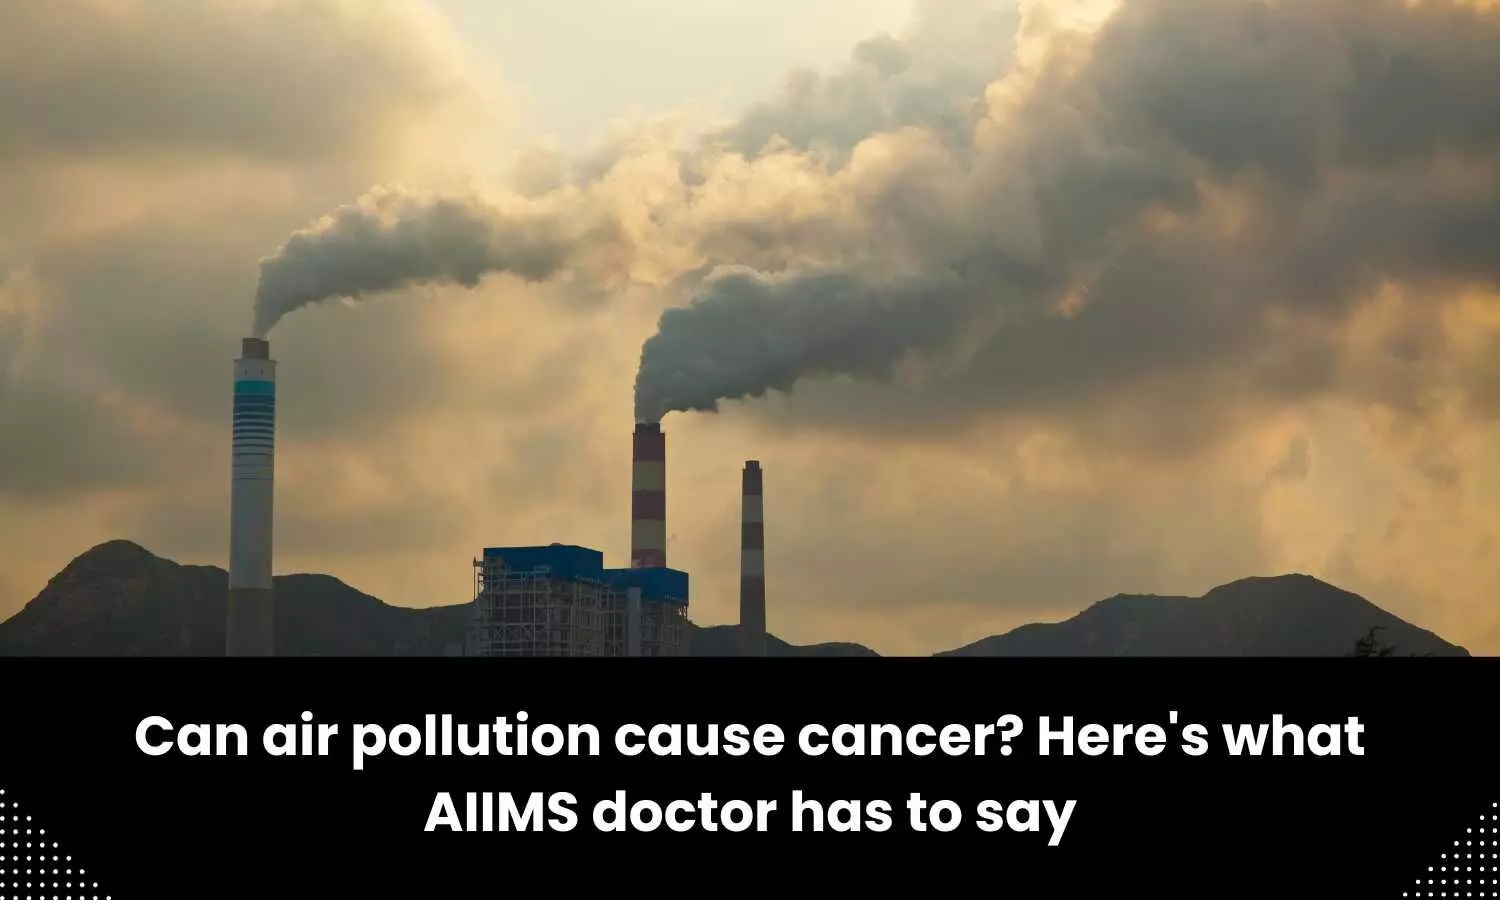 Can air pollution cause cancer? Heres what AIIMS doctor has to say